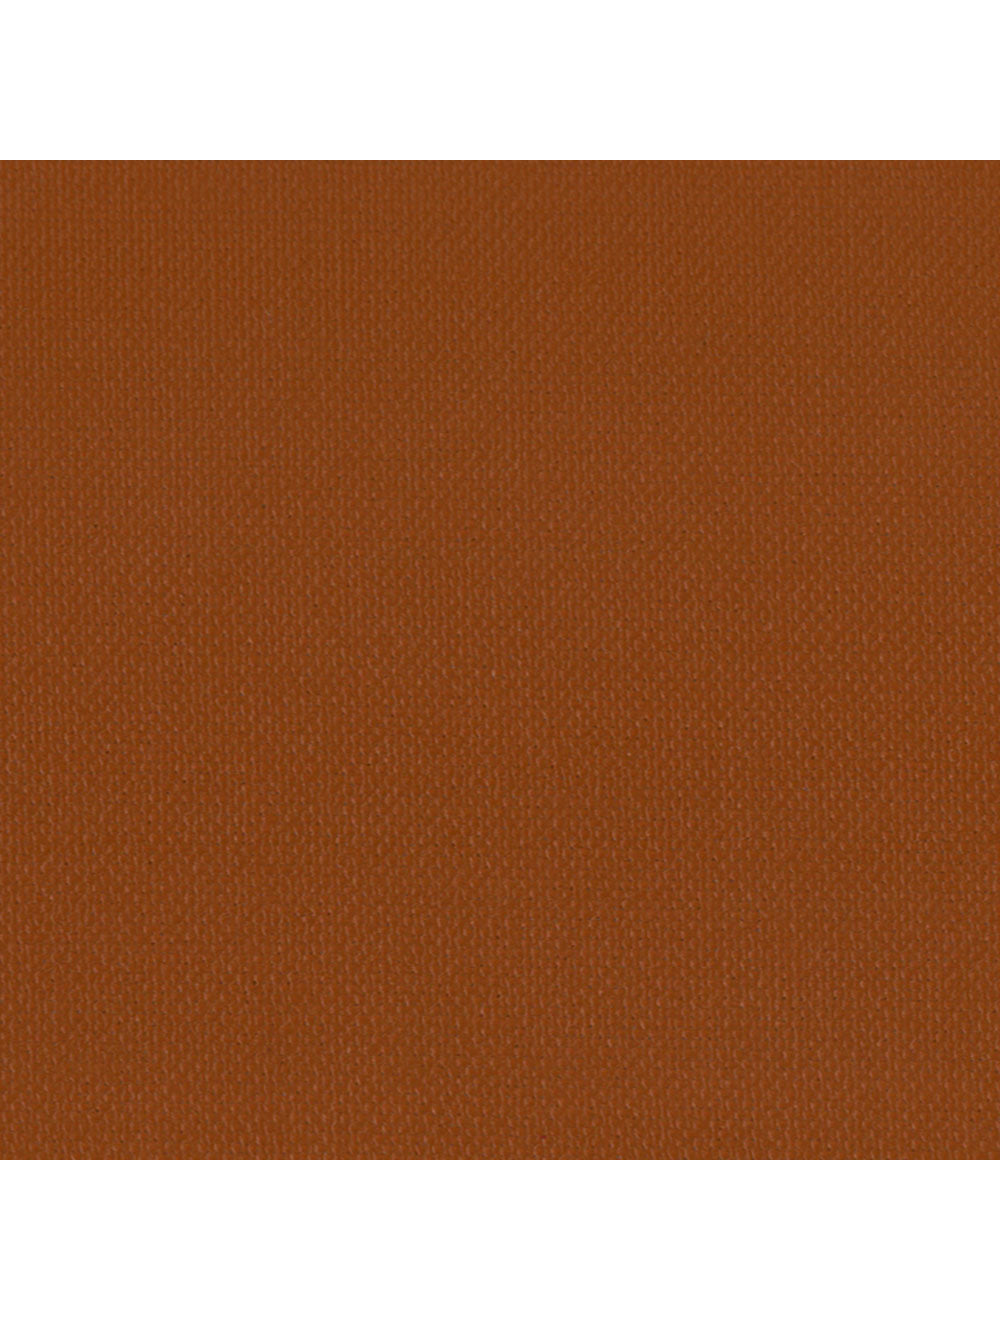 London Terracotta Material Swatch